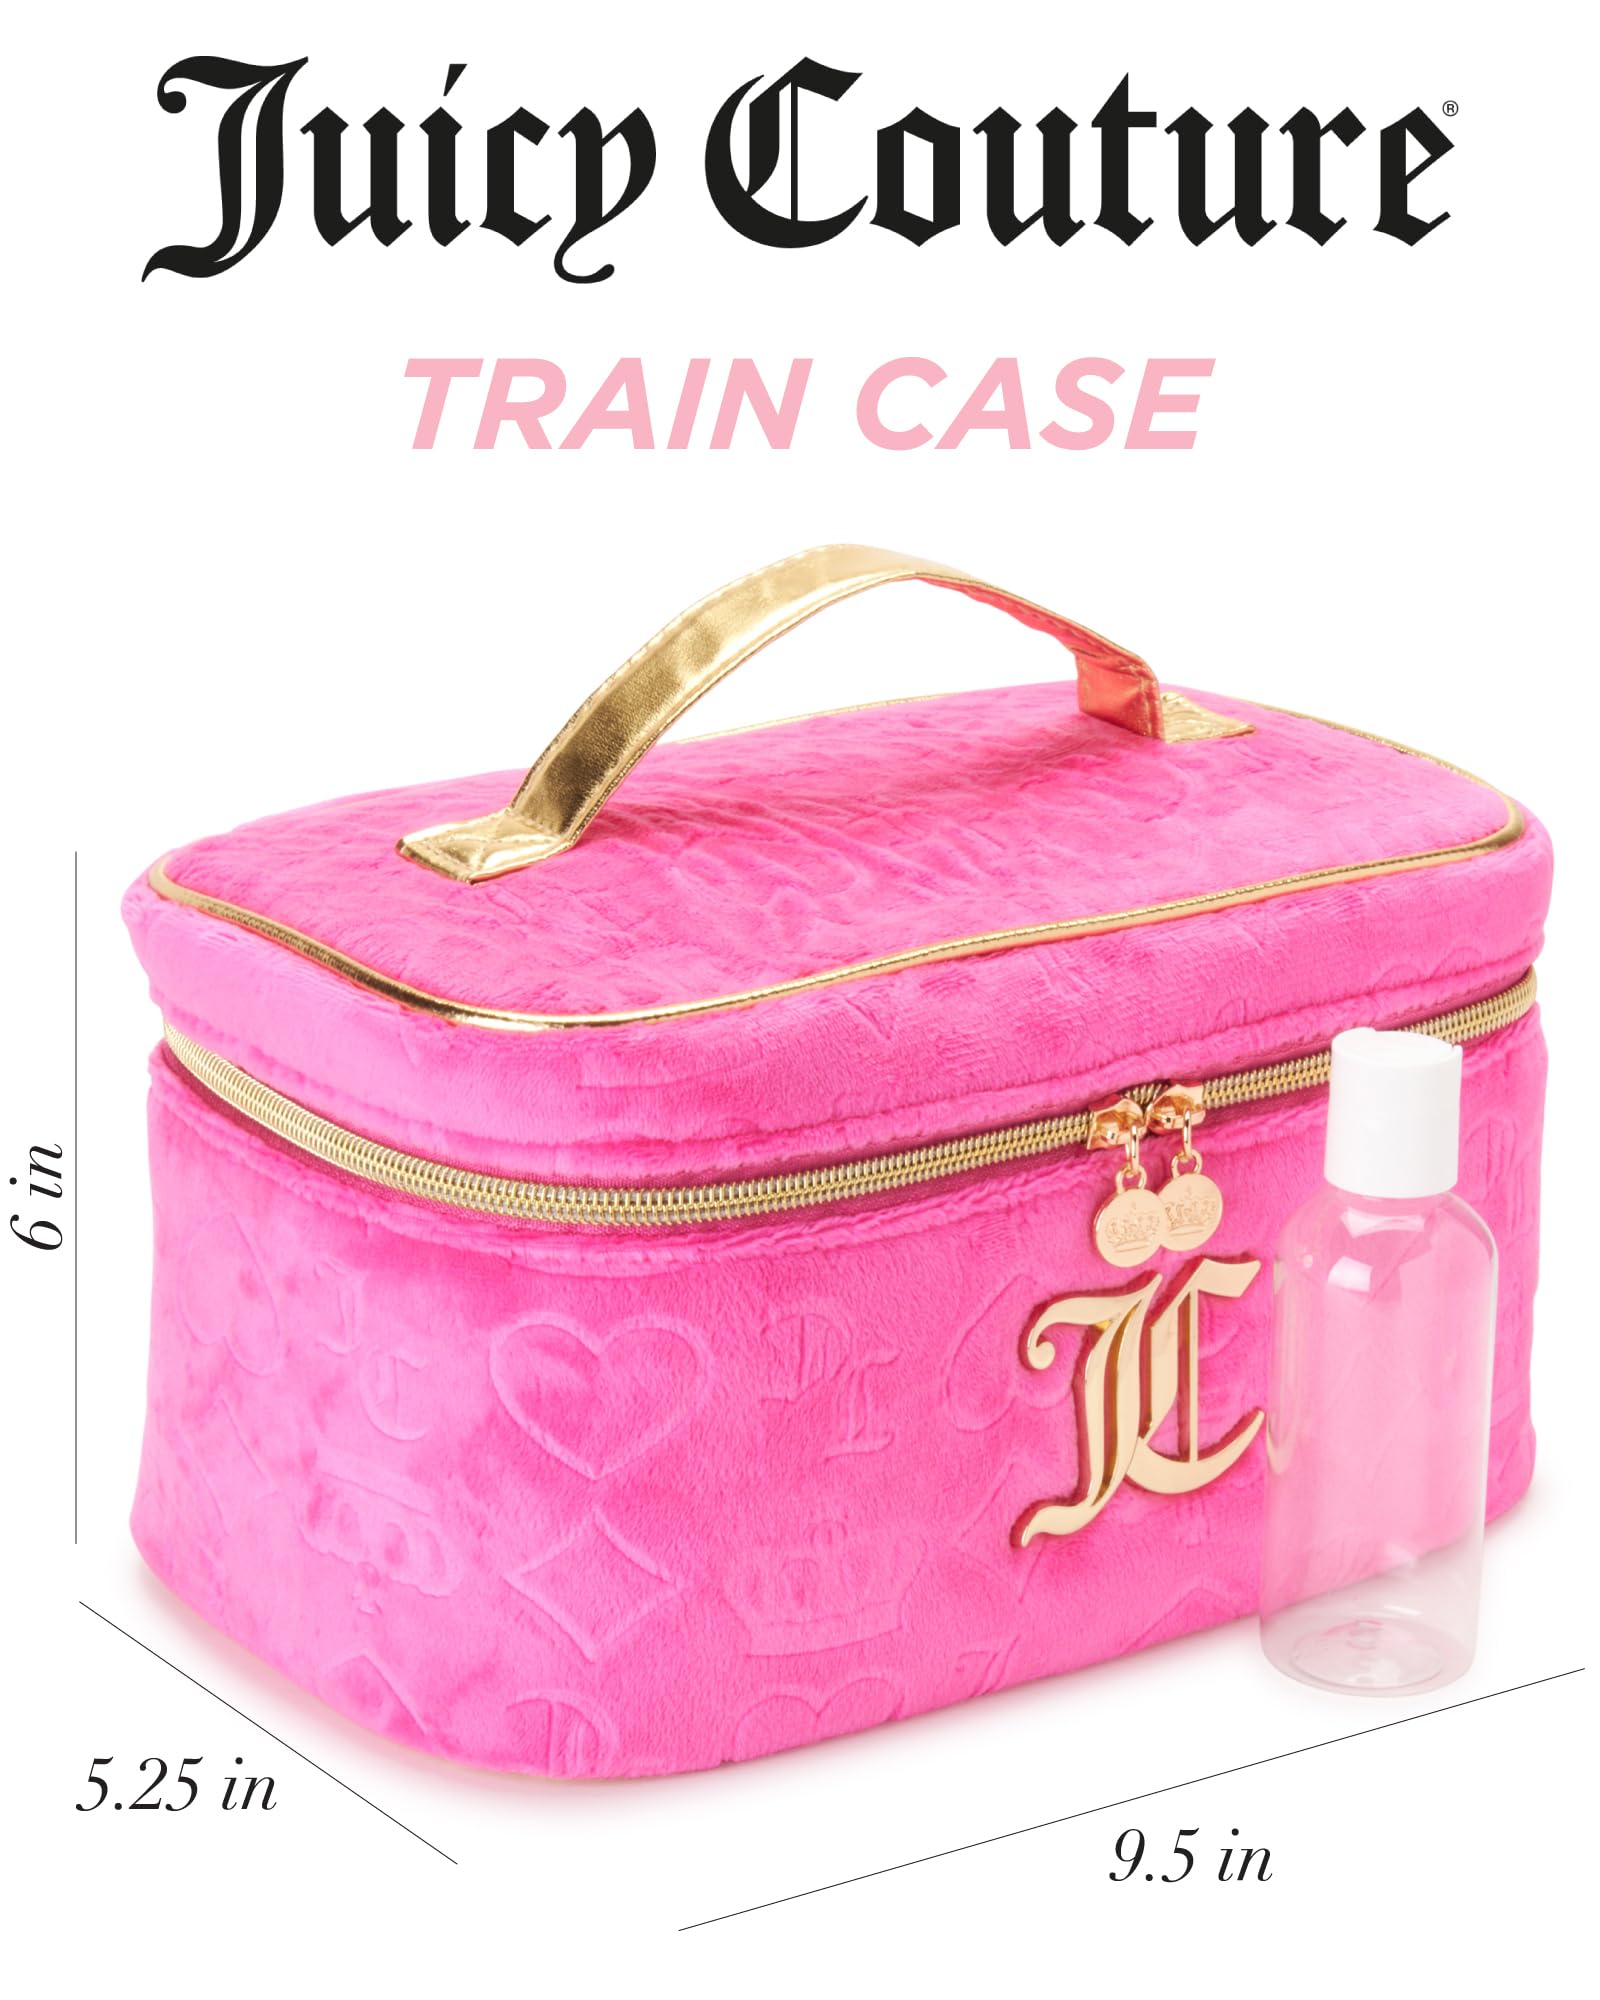 Juicy Couture Women's Cosmetics Bag - Travel Makeup and Toiletries Train Case Organizer, Size One Size, Pink Terry